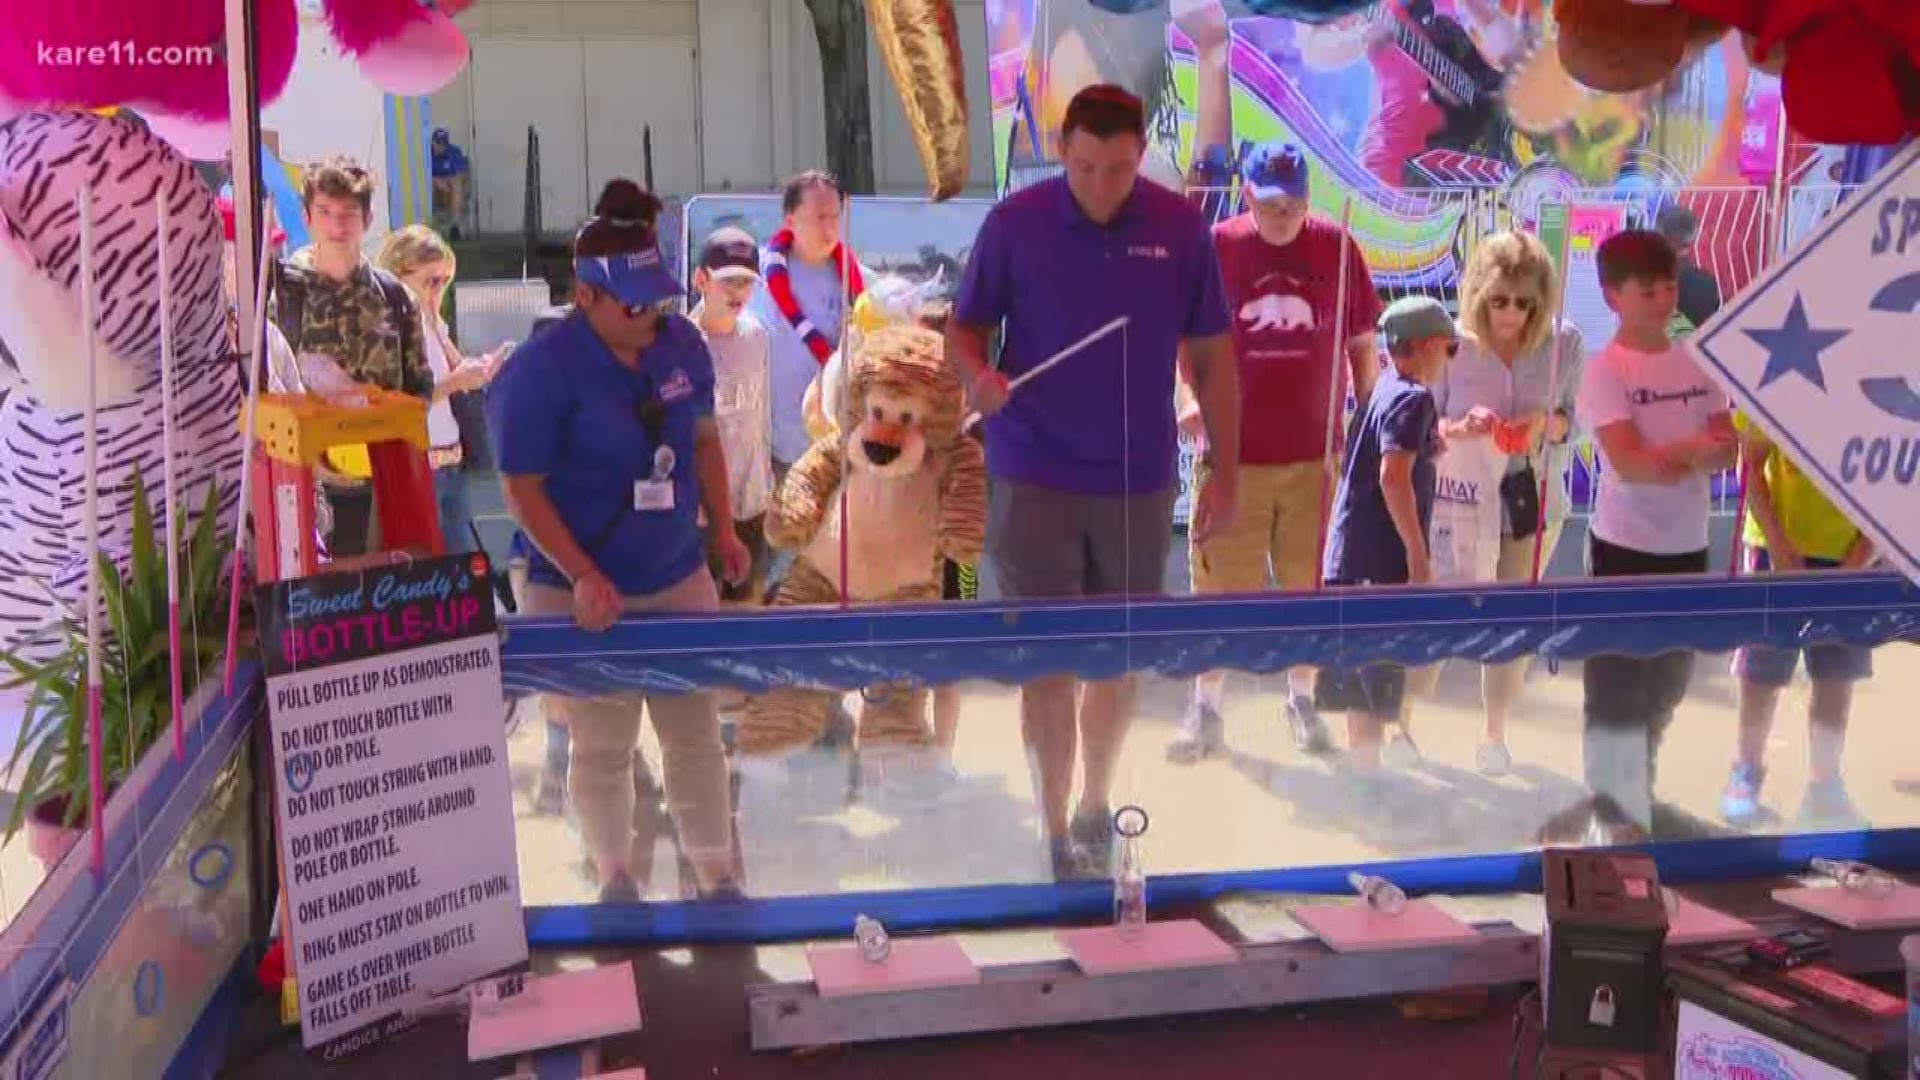 Carnival games come with a stigma and that is something the Minnesota State Fair is trying to clean up.